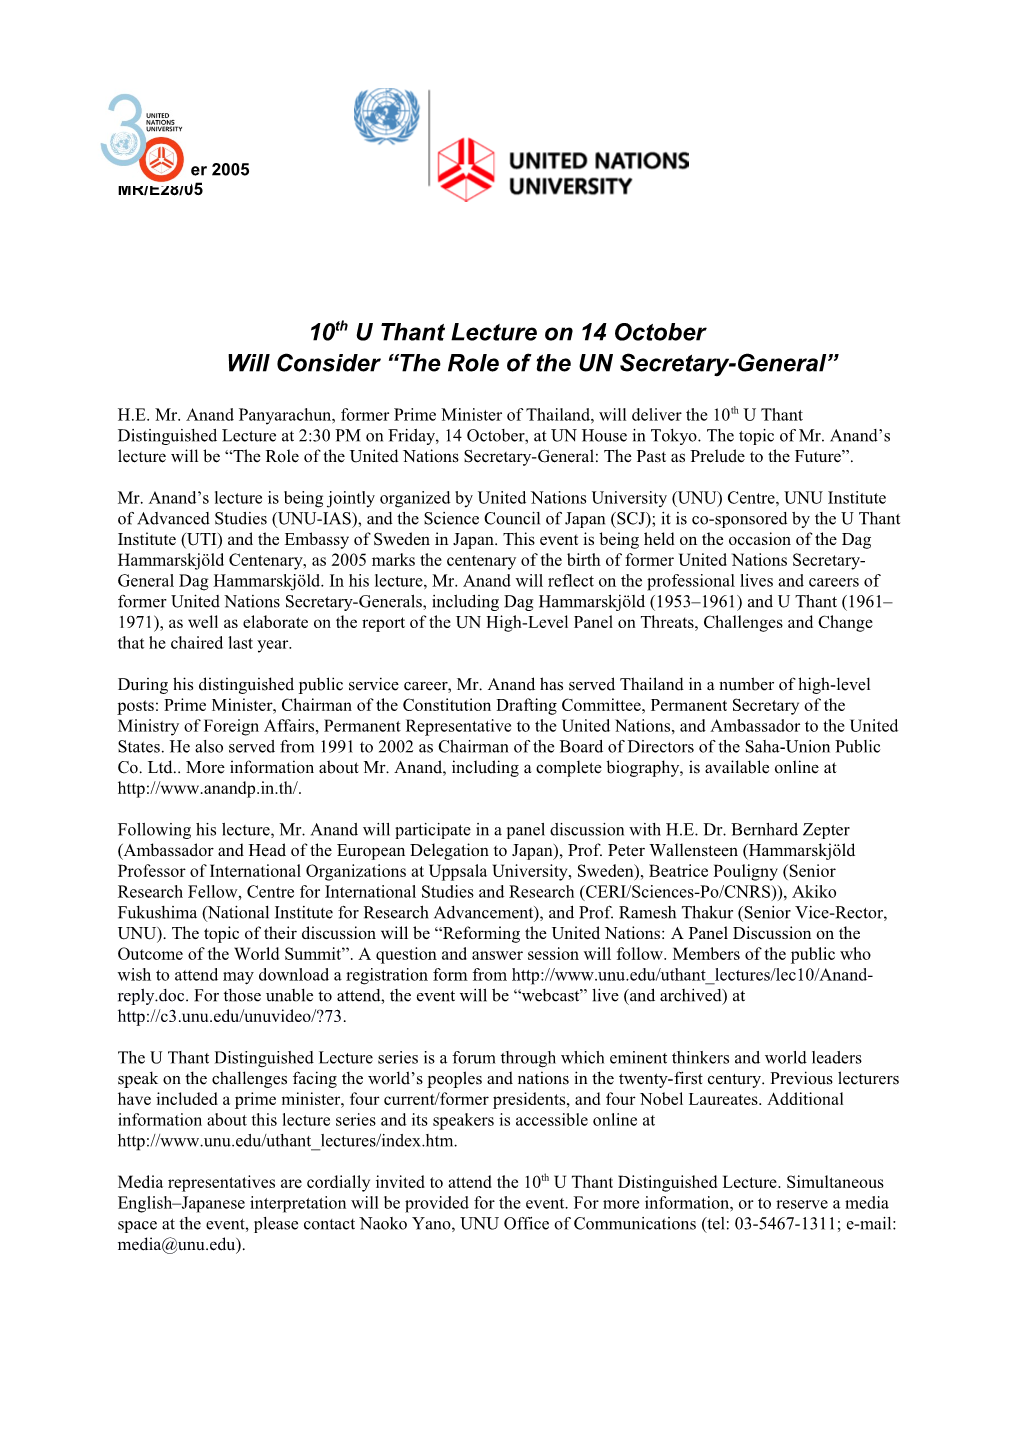 10Th U Thant Lecture on 14 October Will Consider the Role of the UN Secretary-General